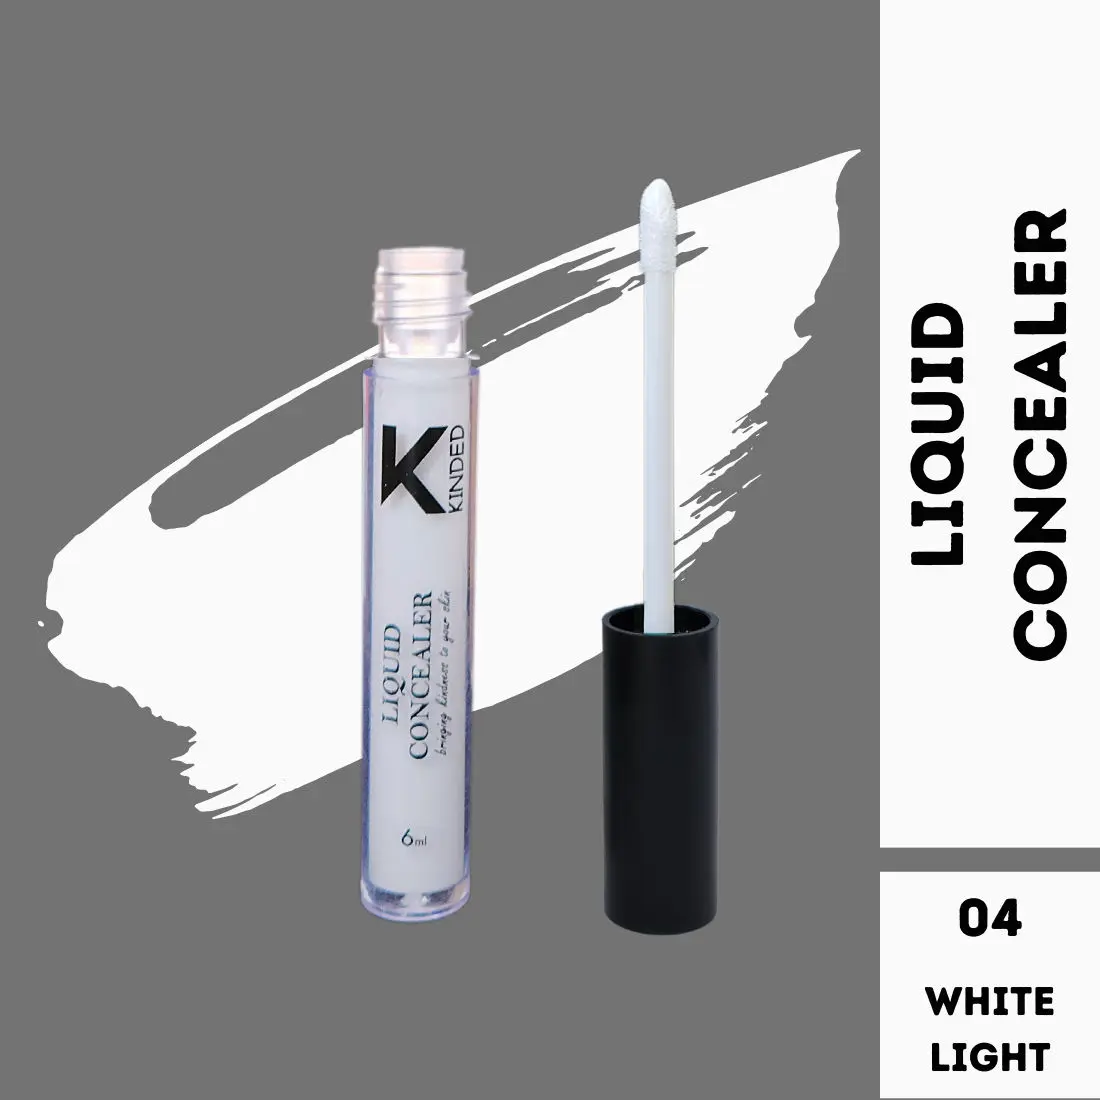 KINDED Liquid Concealer for Face Makeup Full Coverage Colour Corrector Contour Waterproof HD Pro Master Series for Dry & Oily Skin Acne Dark Circles Dark Spots (Creamy Matte, White Light, 6 ml)